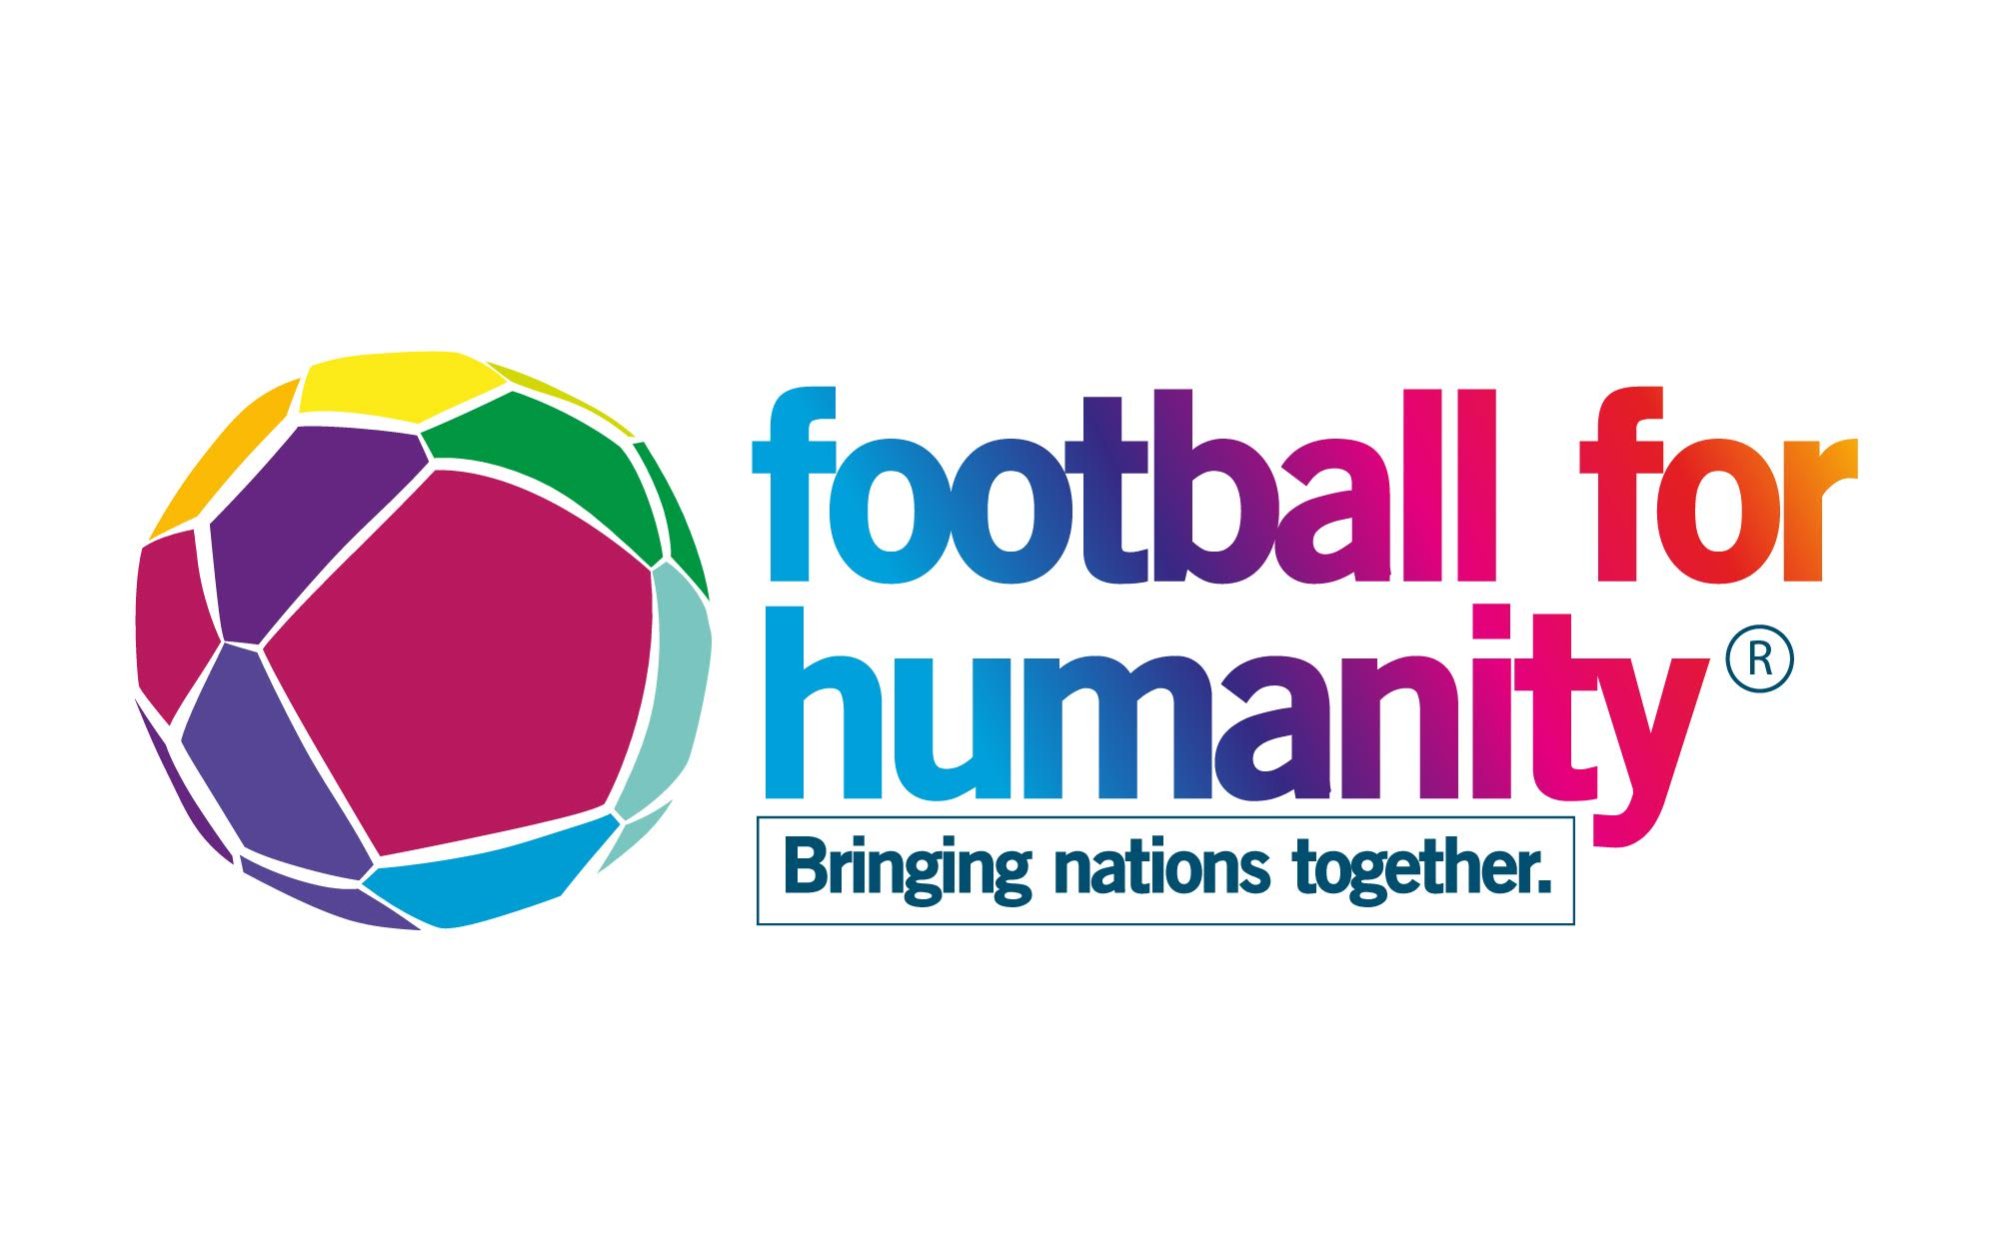 Football for humanity